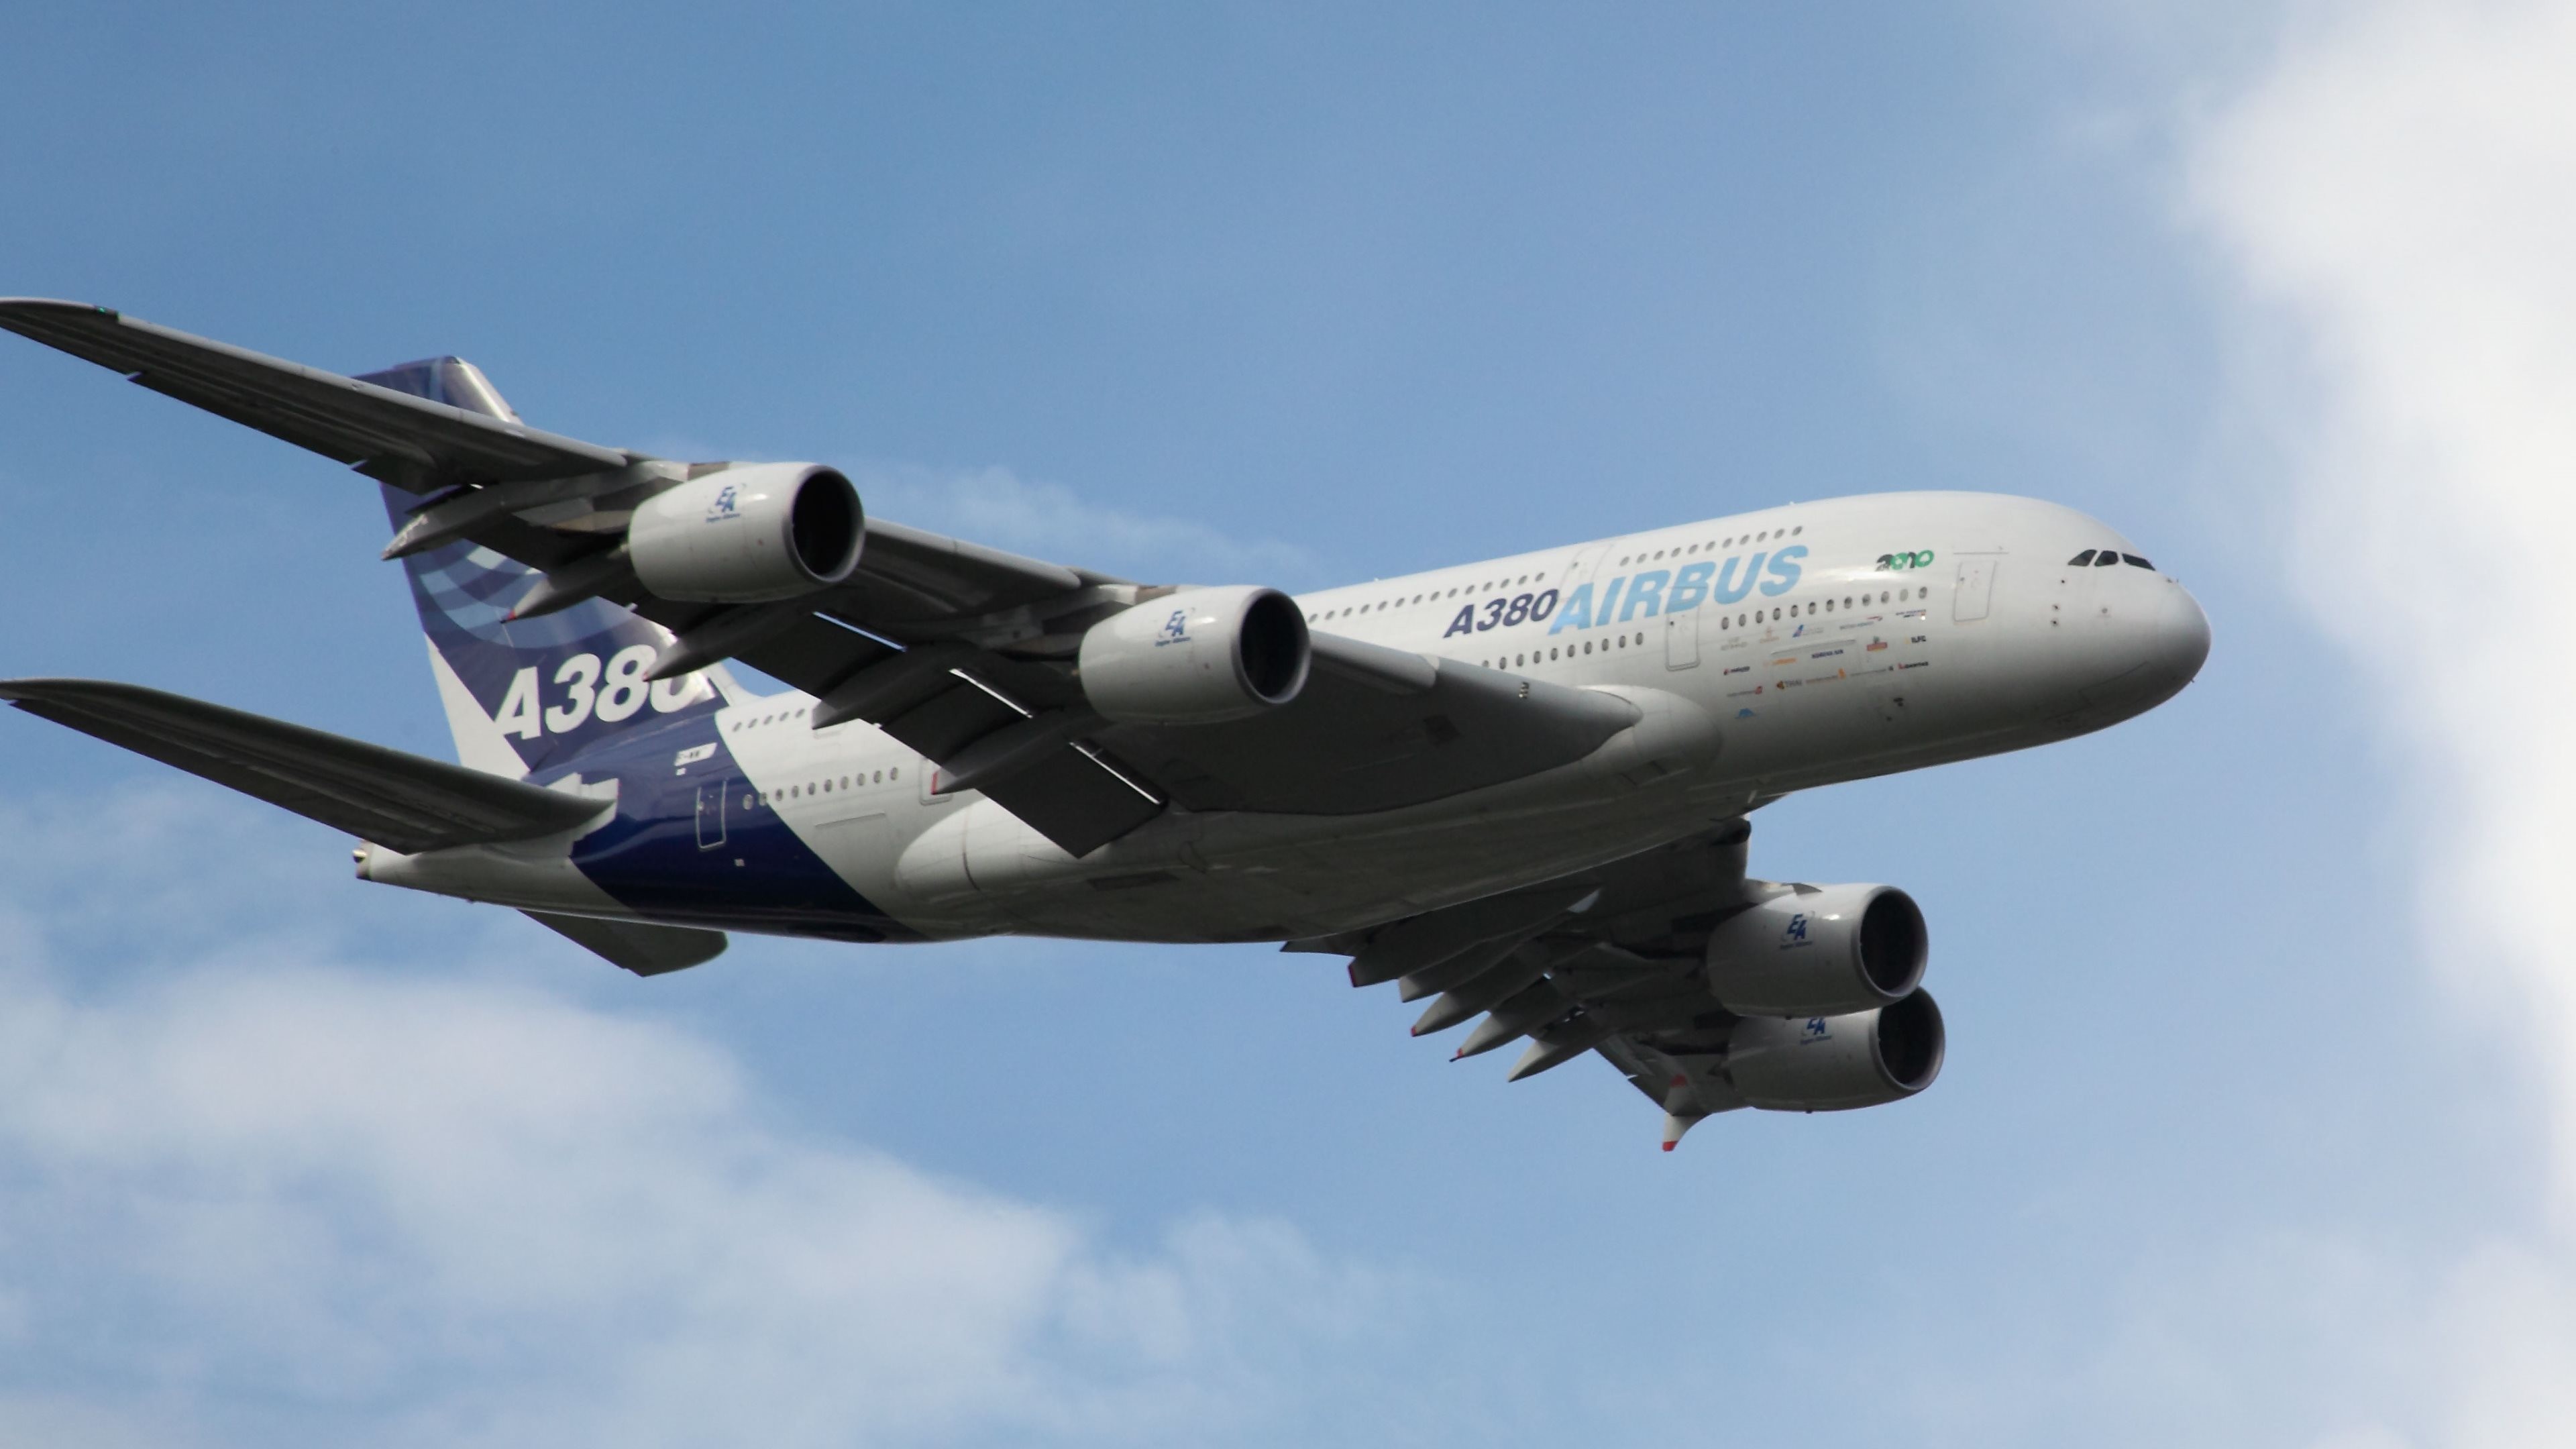 Airbus A380 Wallpaper (74+ images)